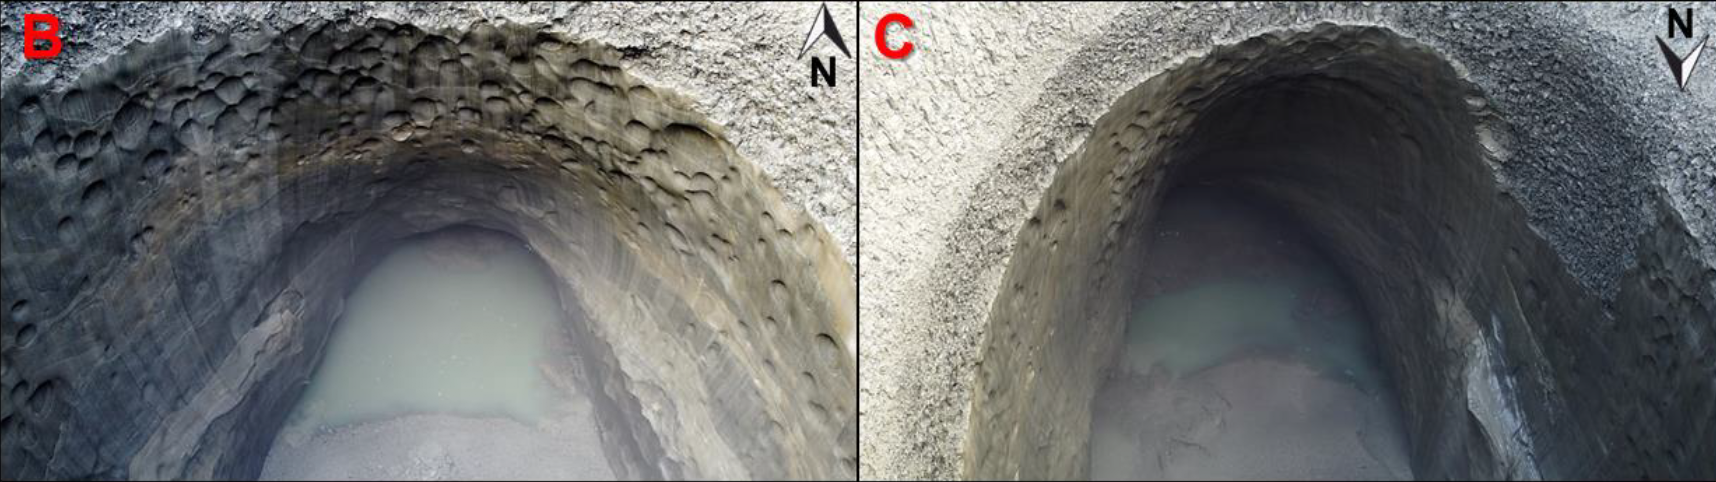 Grottos as the bottom of the crater, as imaged by the drone.  (Image: V. Bogoyavlensky et al., 2021/Geosciences)